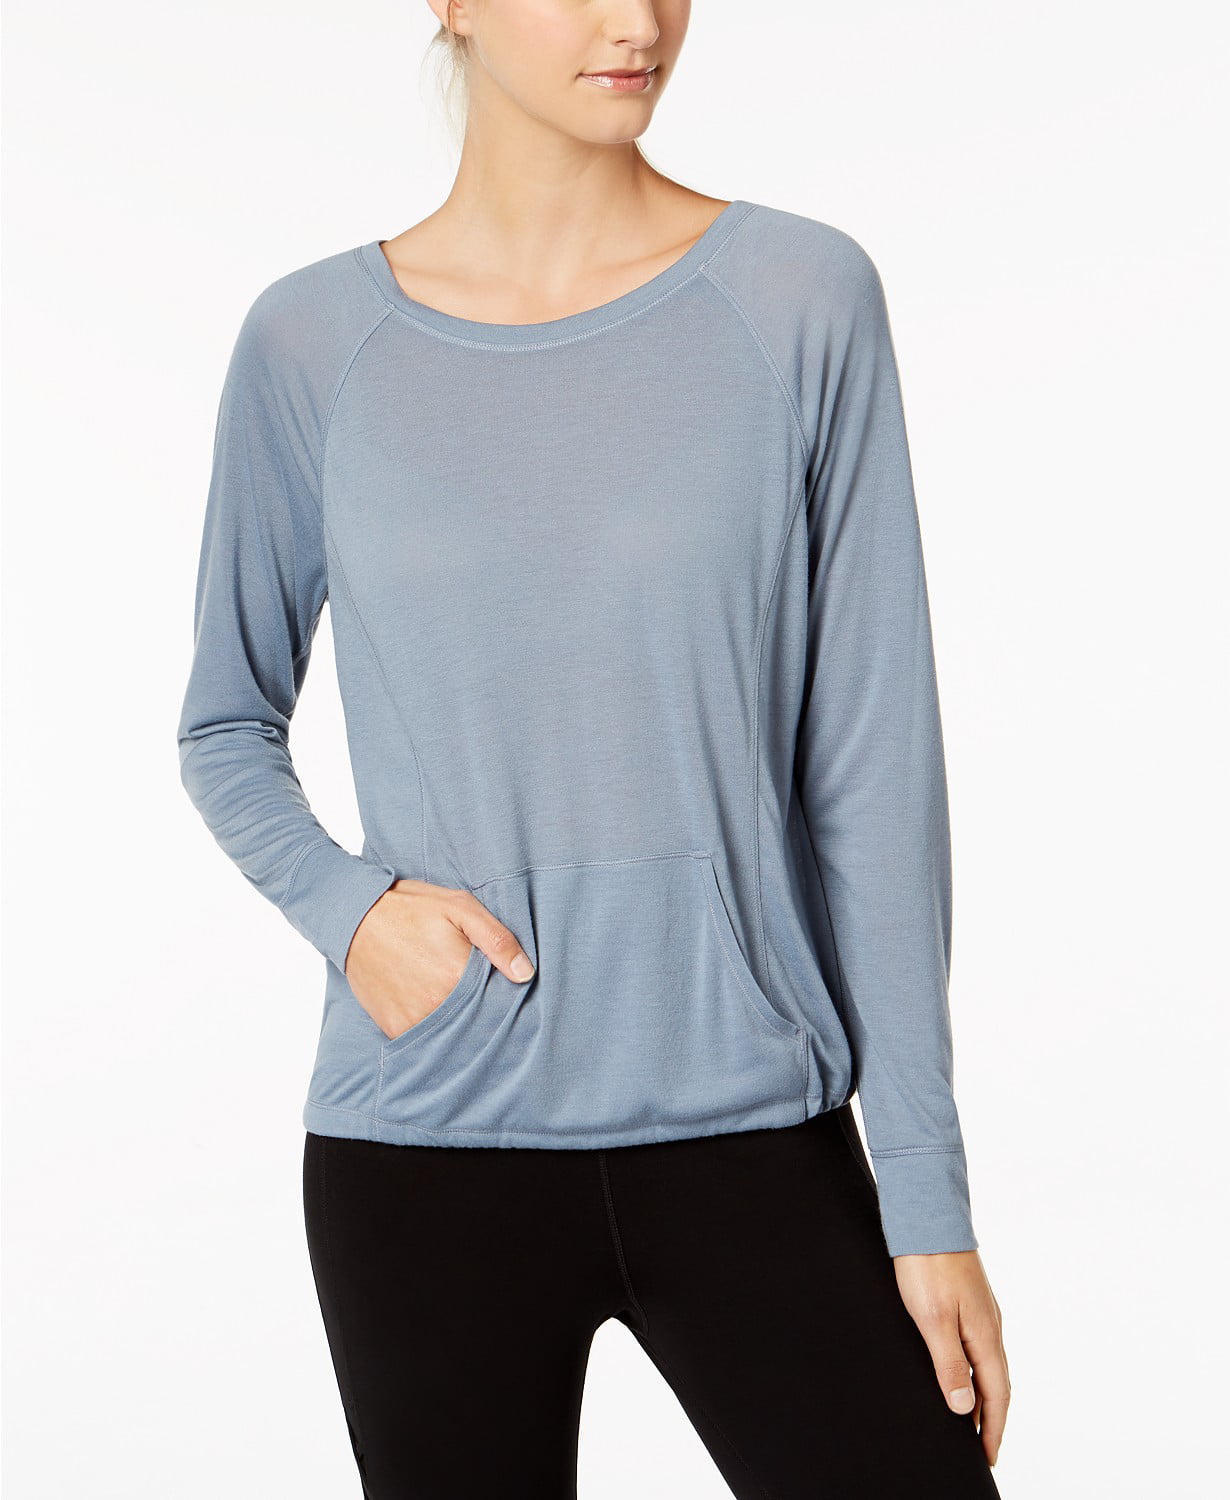 Details about   ColdPruf Women's Platinum Plus-Size For My Size Only Dual Layer Crew-Neck Top 